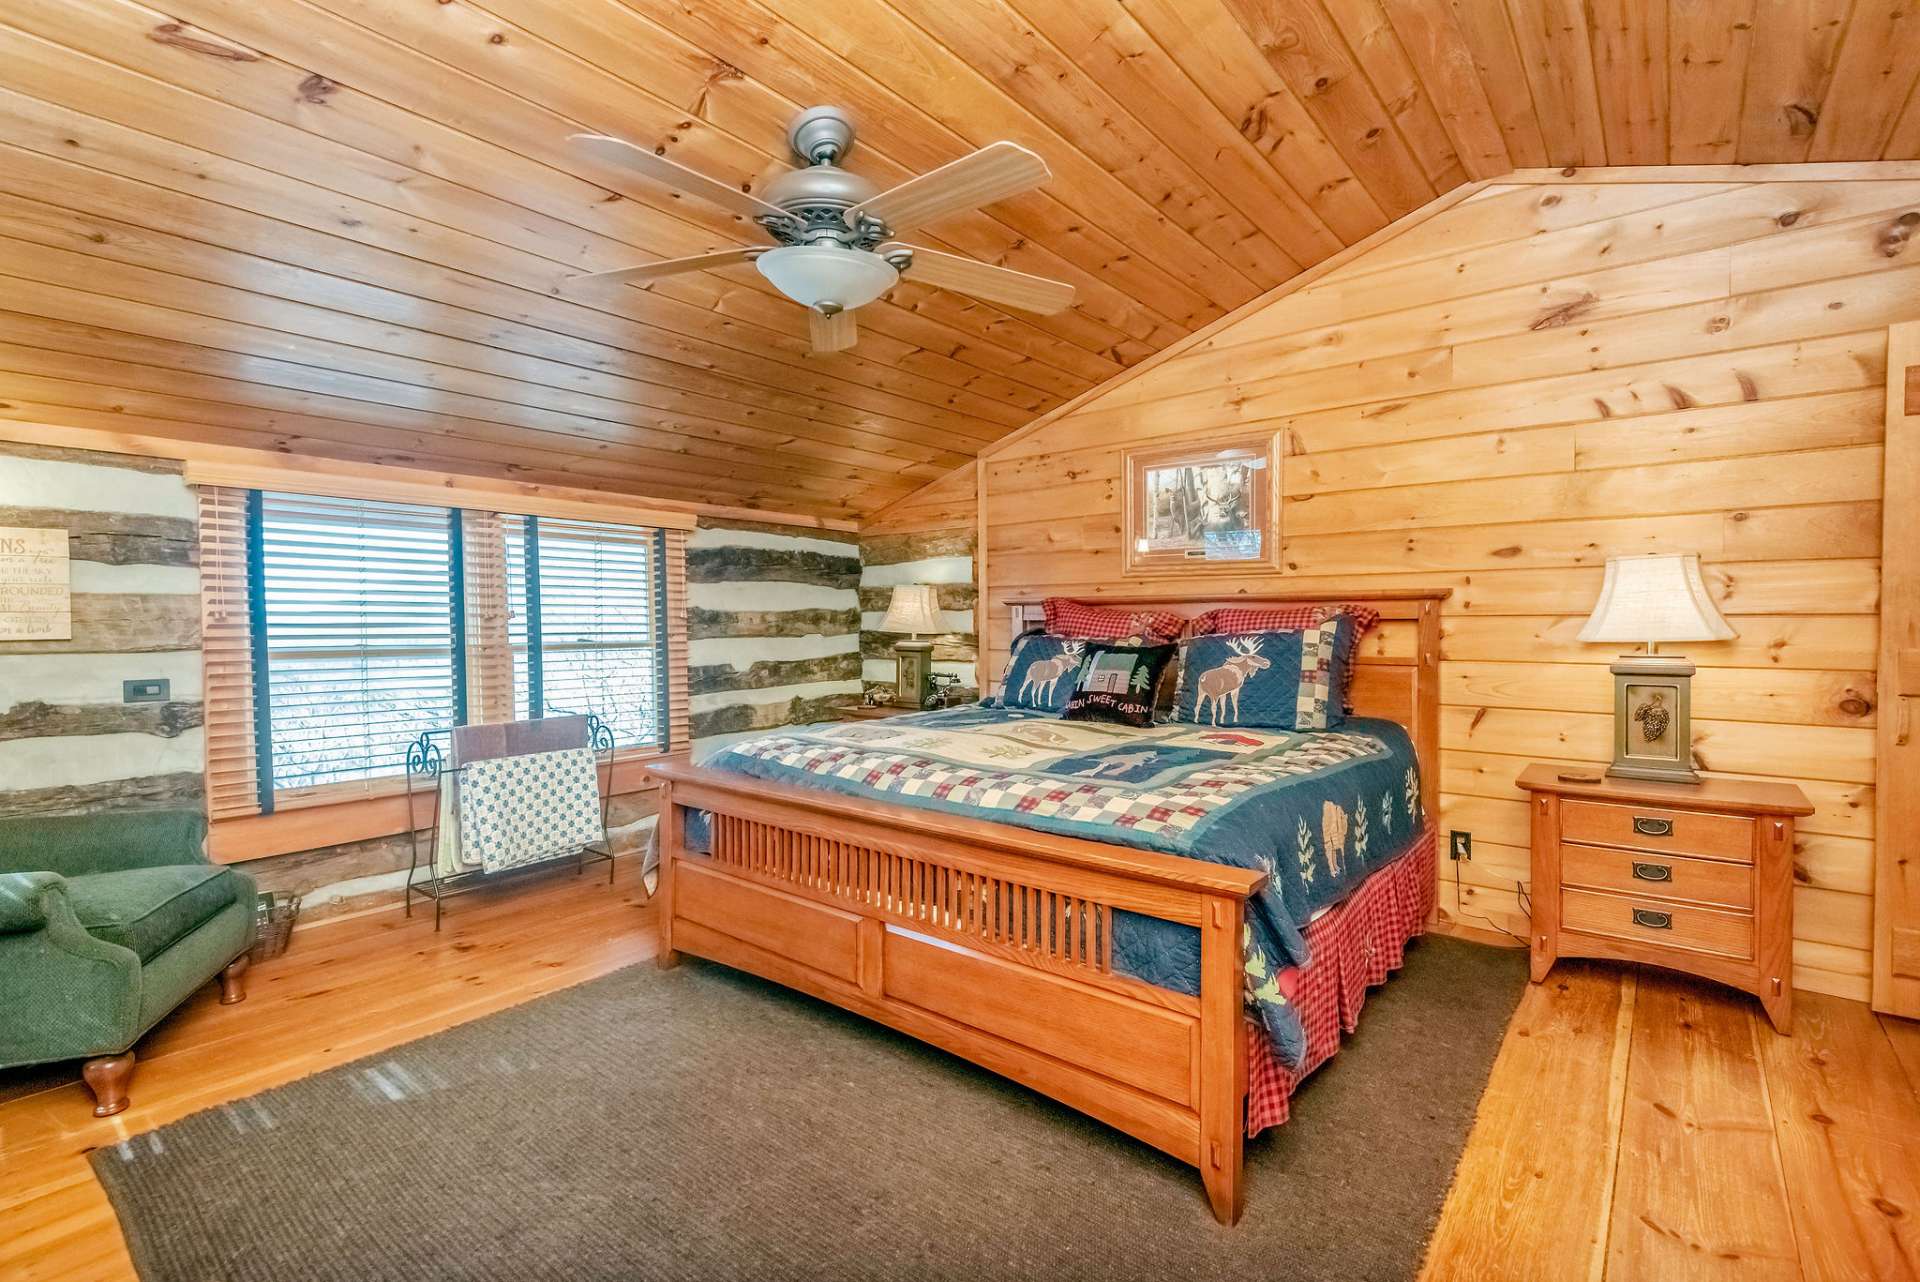 One of two spacious upper level bedrooms each with a phenomenal view.